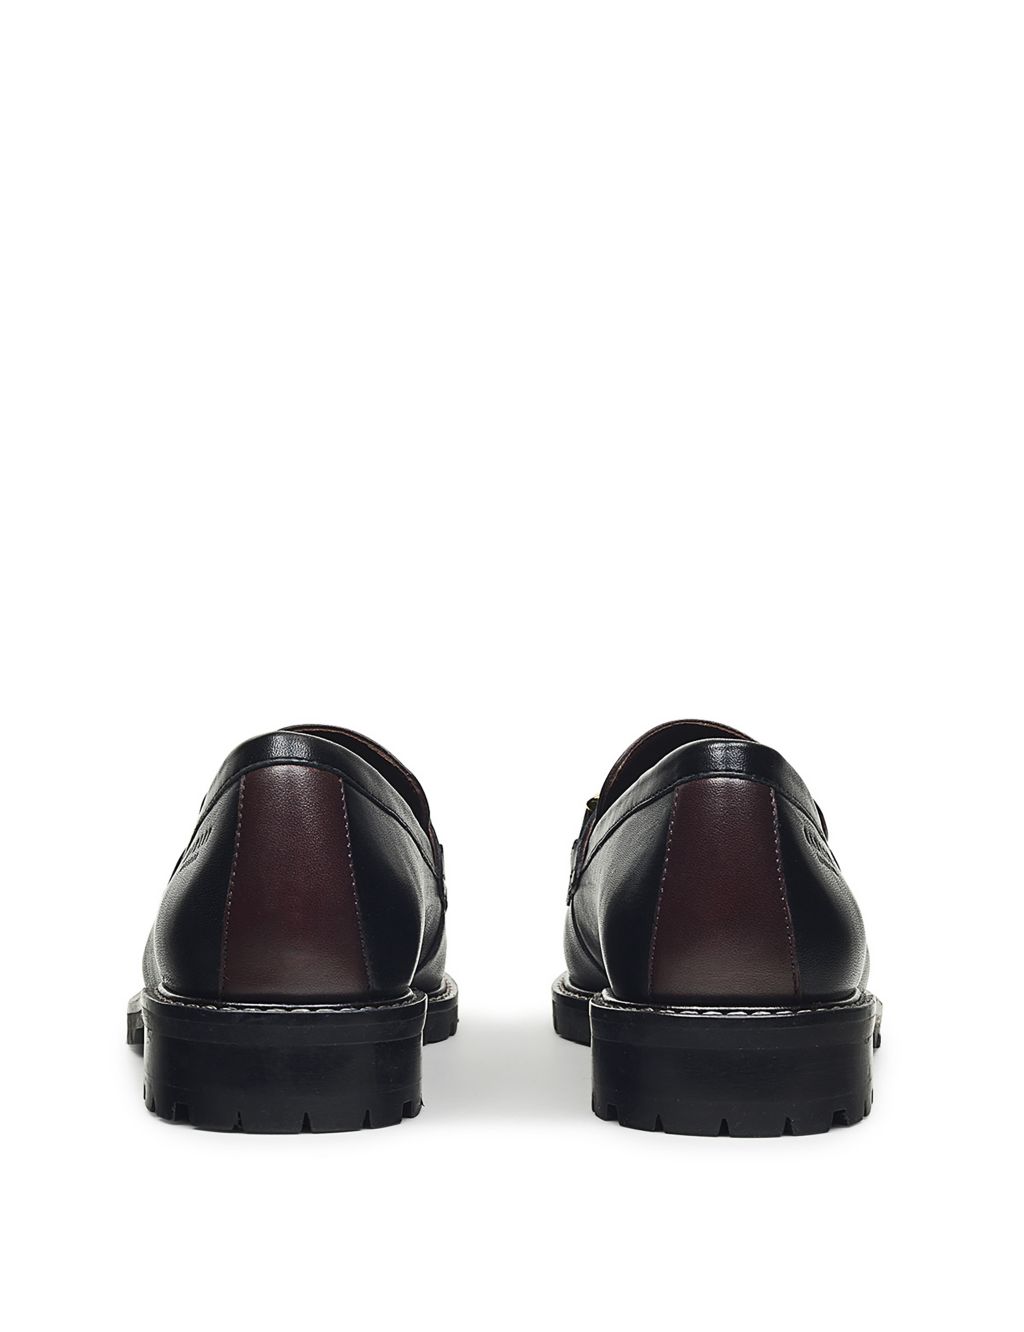 Leather Chunky Chain Detail Loafers image 5